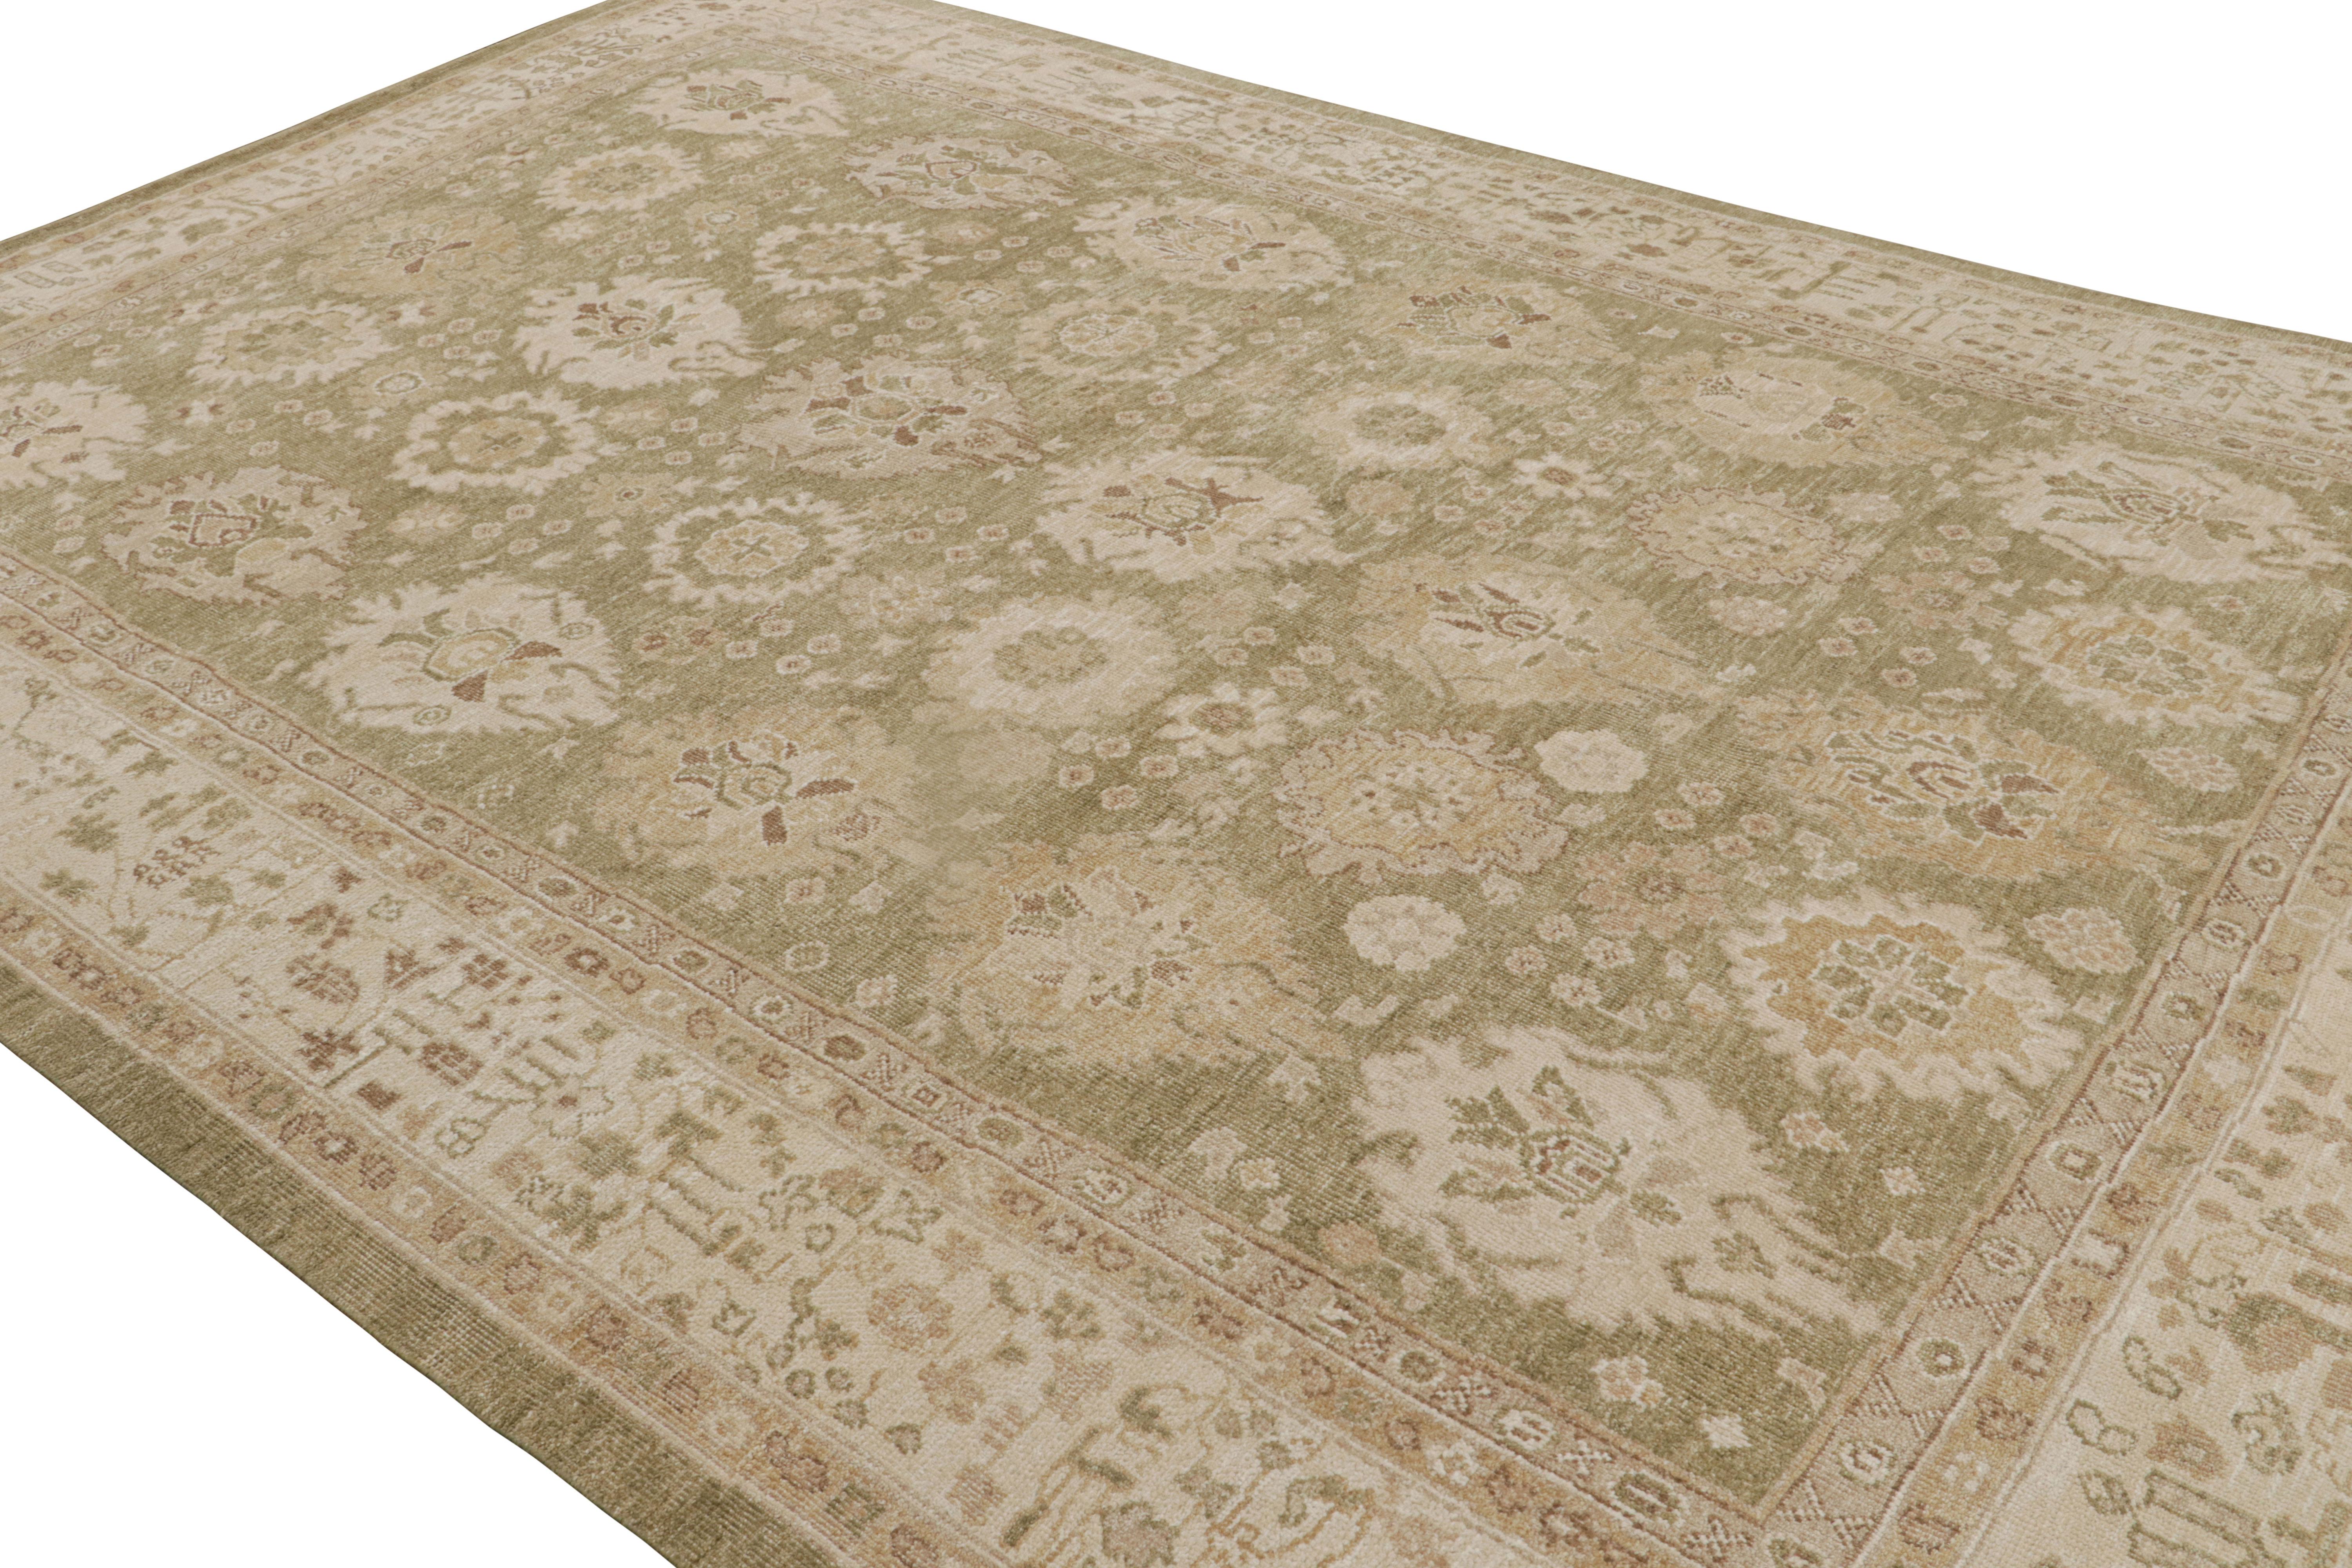 This 10x14 rug from the Modern Classics Collection features chartreuse green underscores, beige-brown and ivory floral patterns in a rich and elegant look—one of the most interesting colorway combinations in this collection worth noting. 

On the